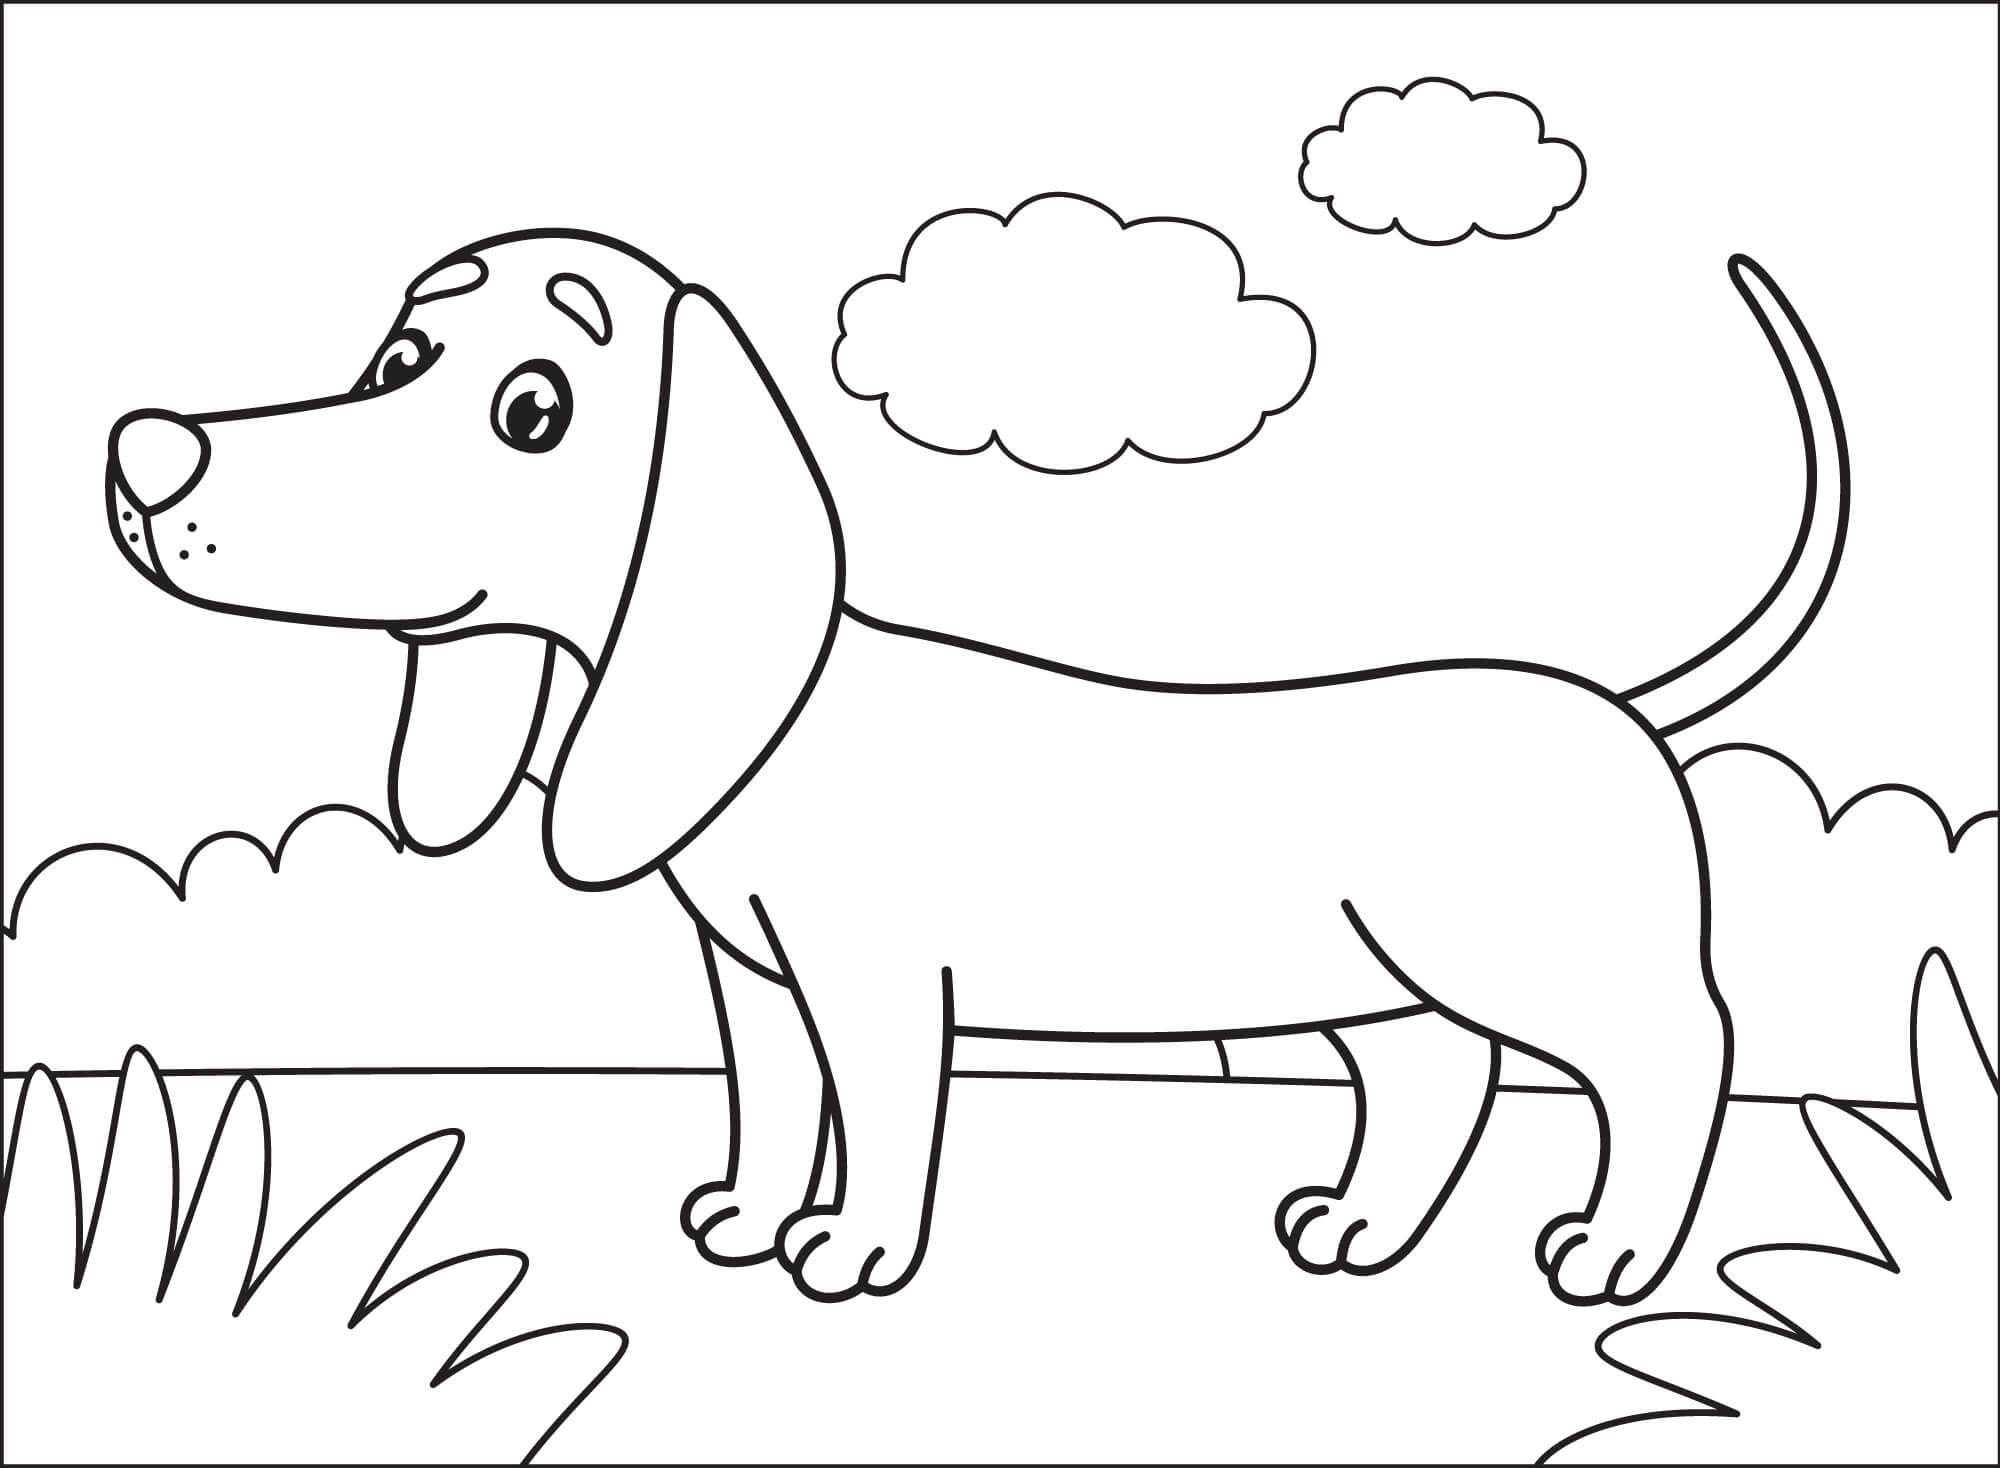 Dachshund Coloring Pages For Kids